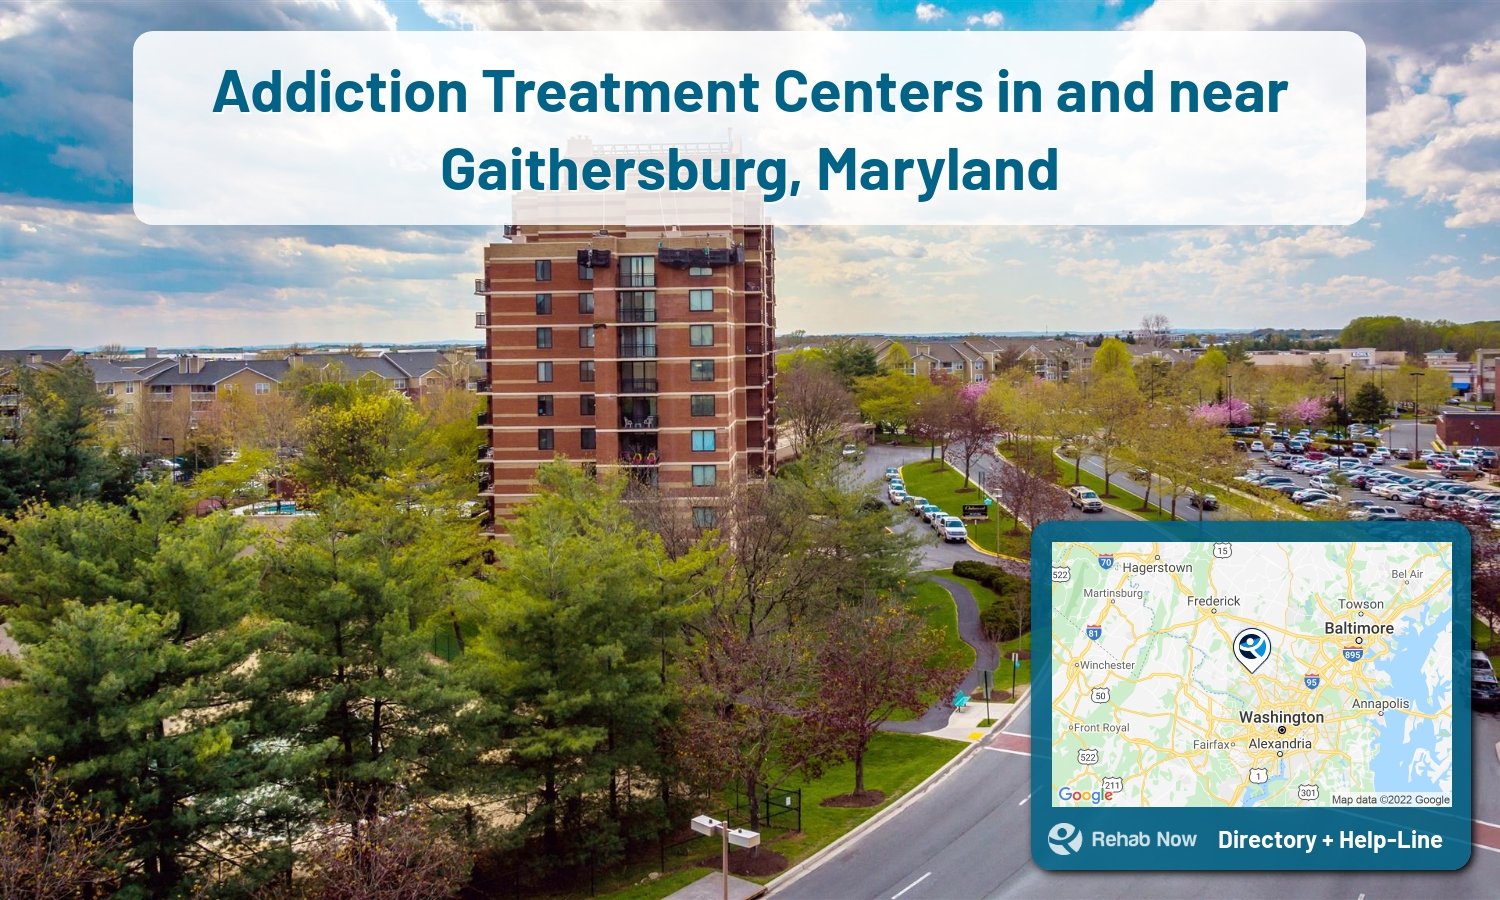 List of alcohol and drug treatment centers near you in Gaithersburg, Maryland. Research certifications, programs, methods, pricing, and more.